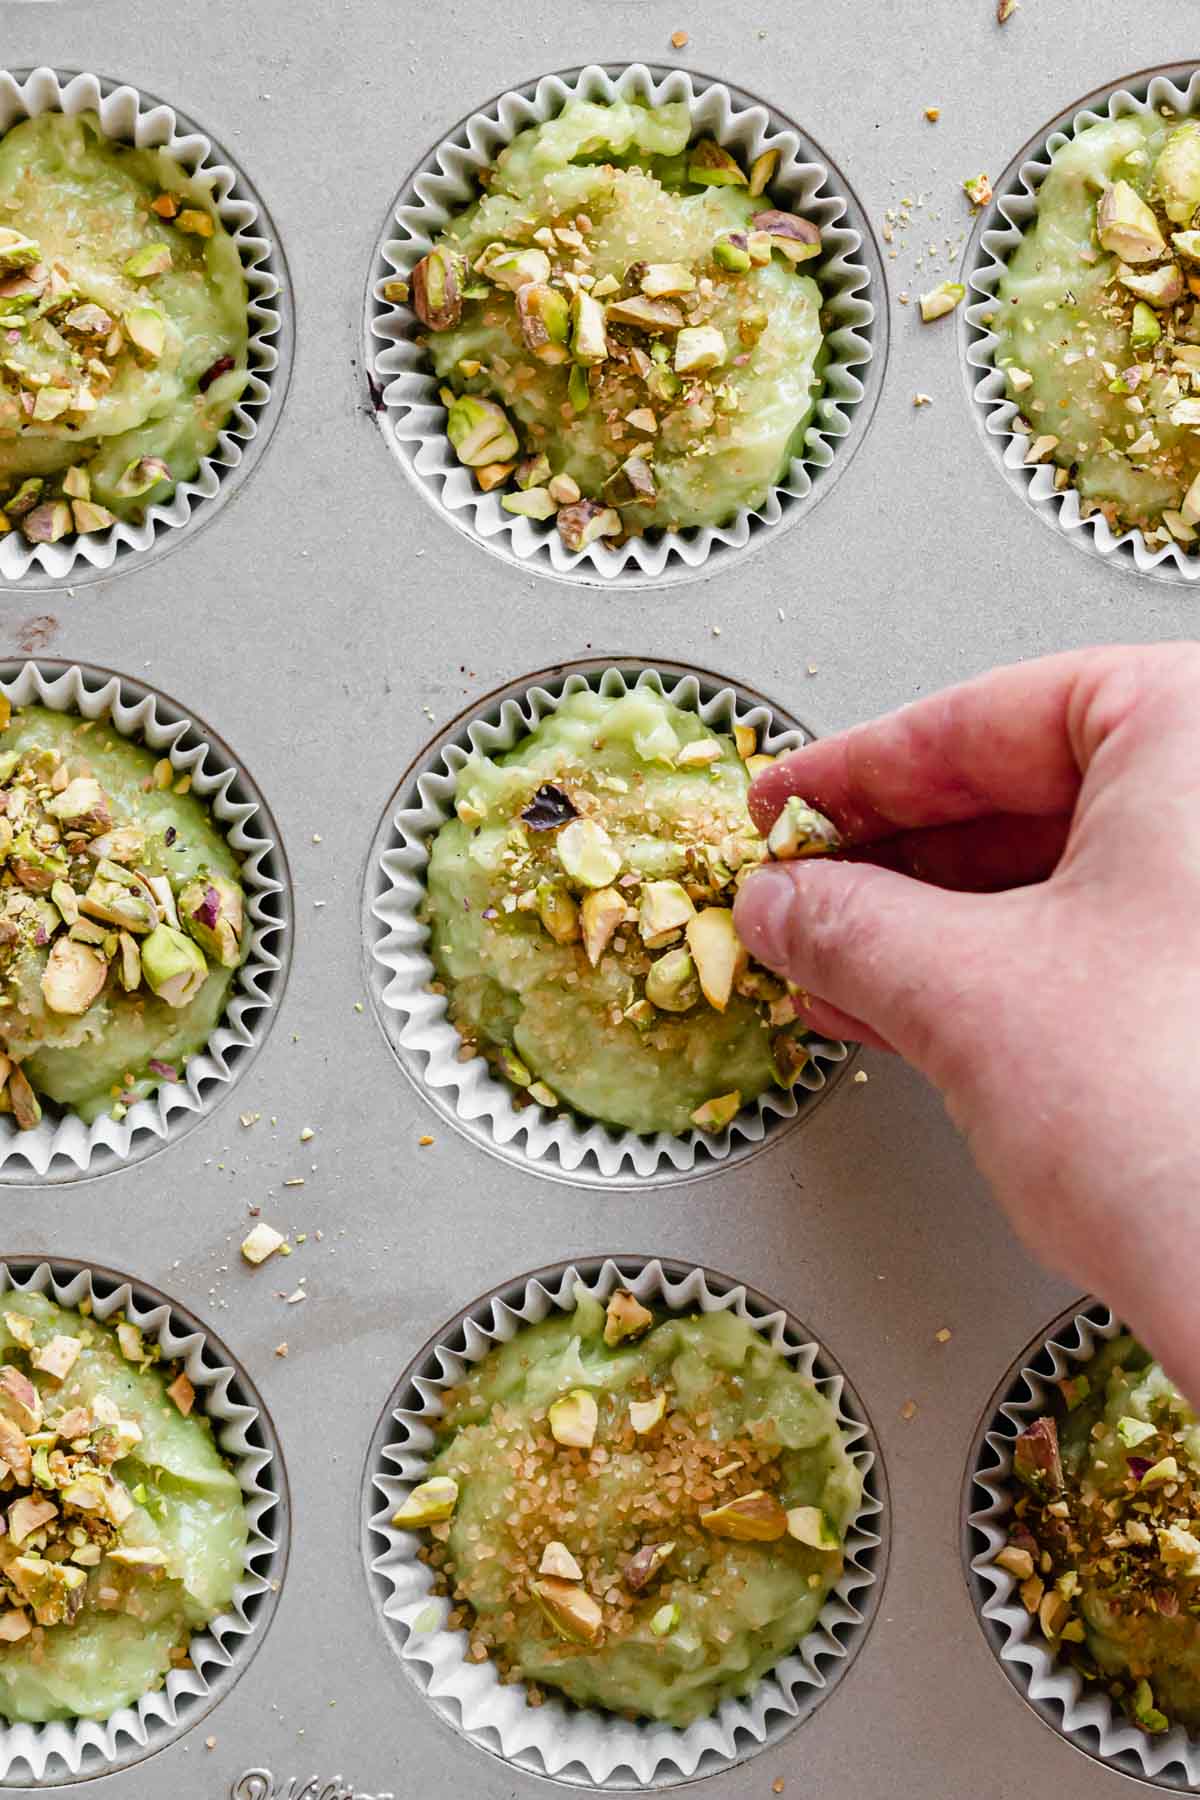 A hand adds chopped pistachios to the top of the muffin batter.